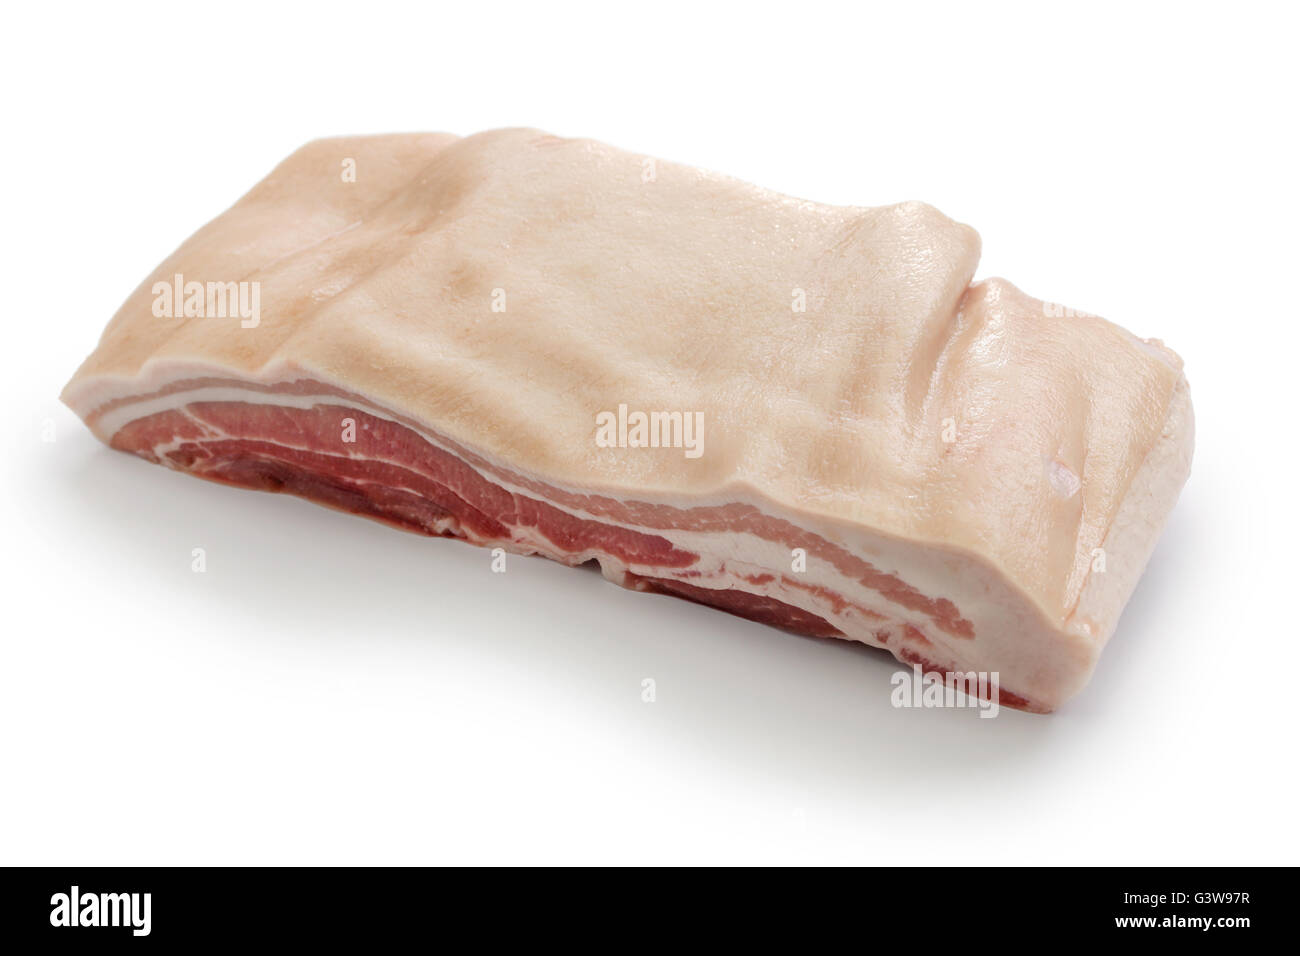 pork belly with skin on white background Stock Photo